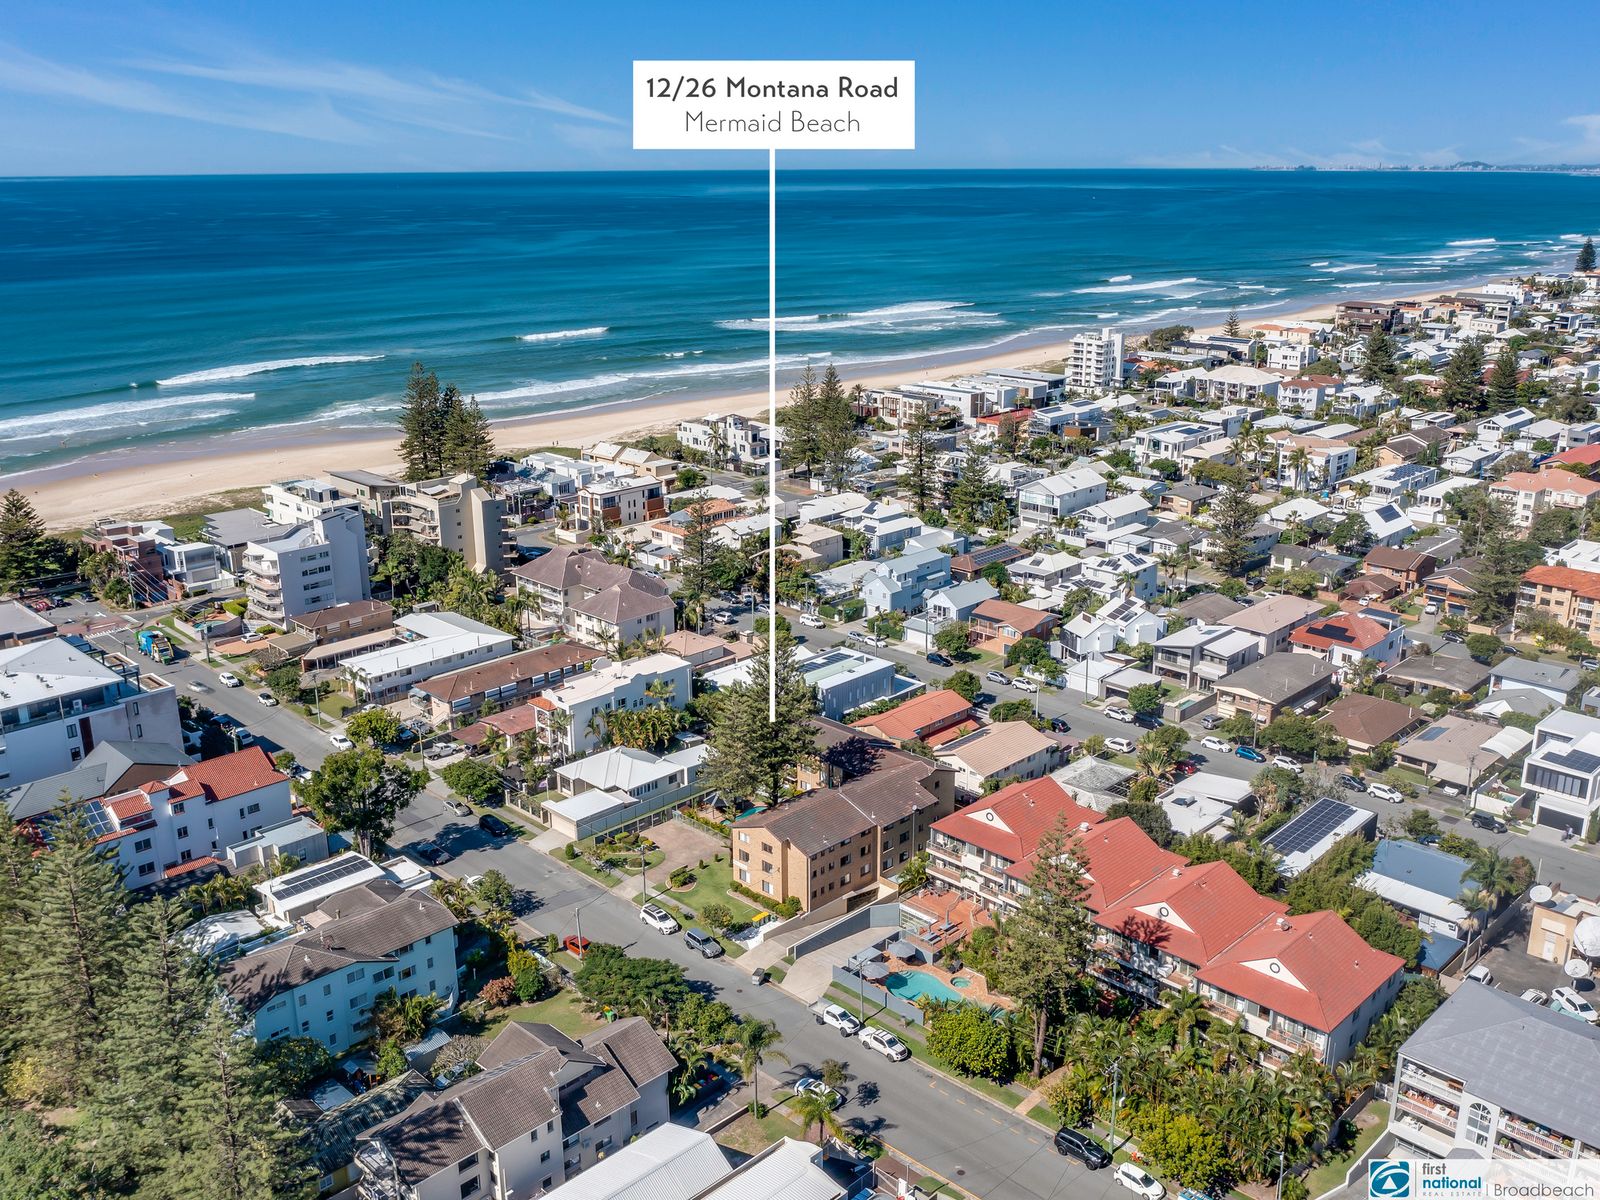 12/26 Montana Road, MERMAID BEACH, Unit for Sale - First National Real